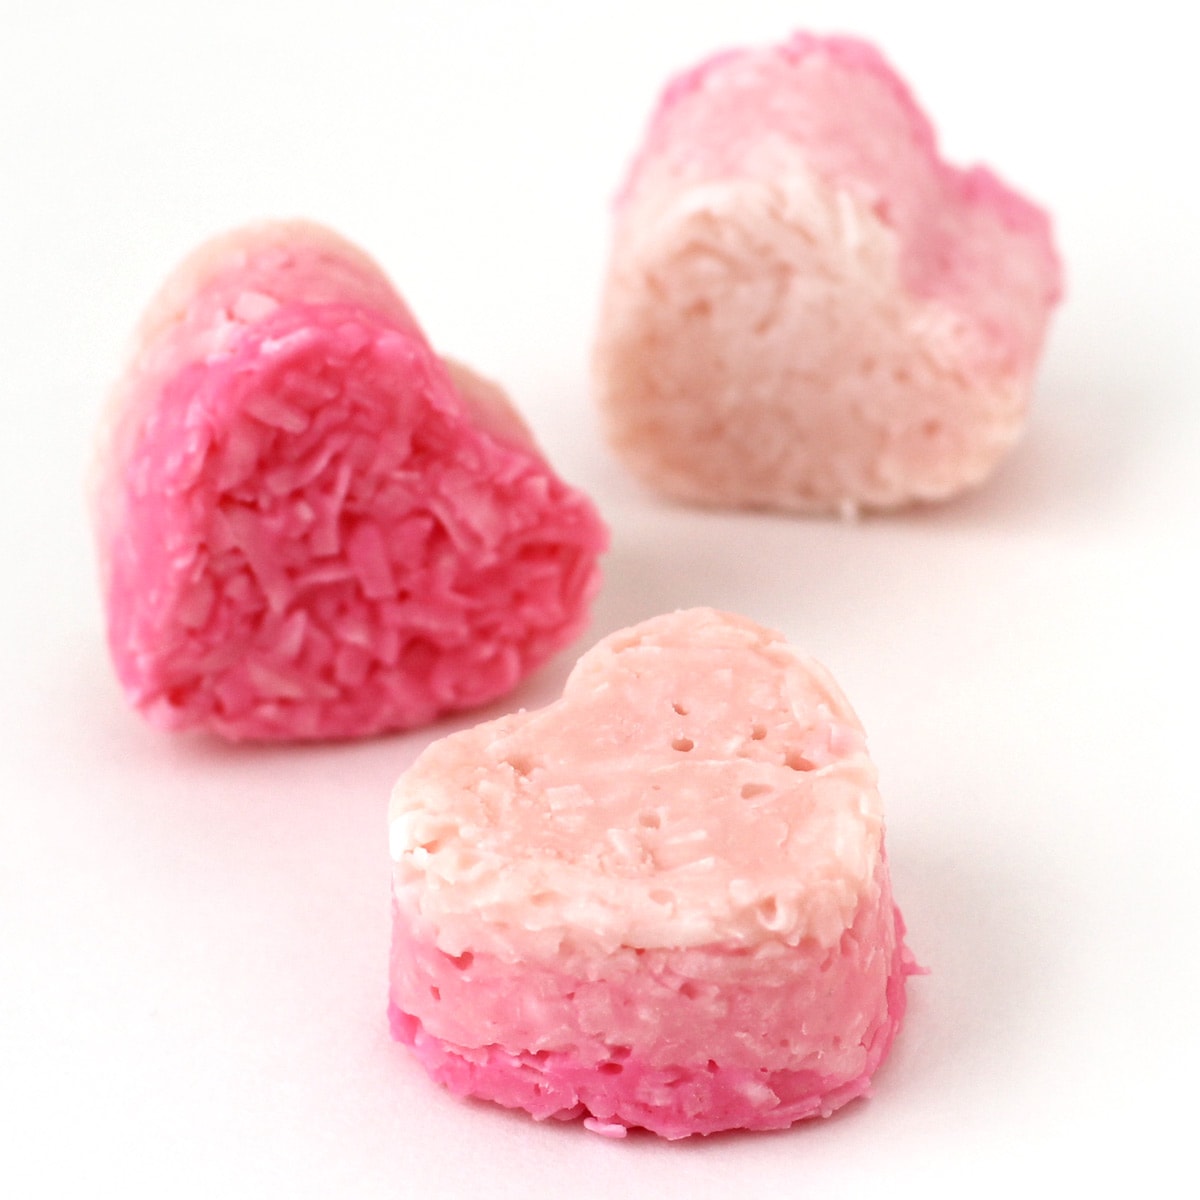 coconut candy hearts colored bright pink, medium pink, and light pink